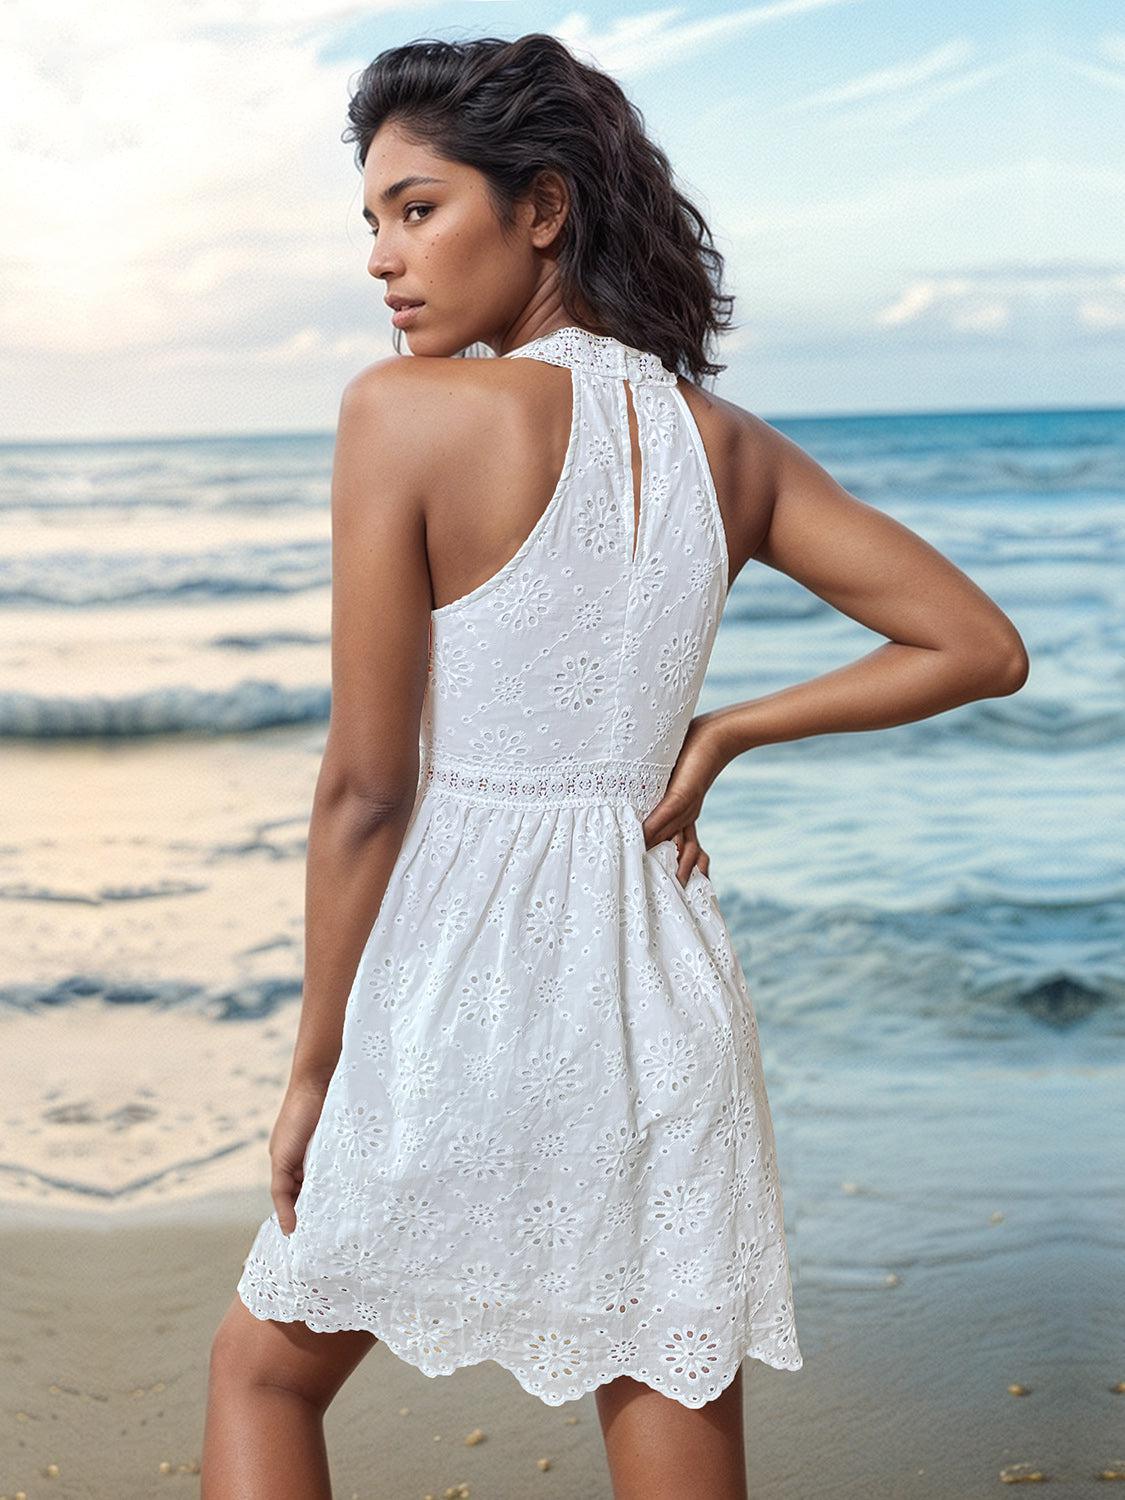 a woman in a white dress standing on a beach